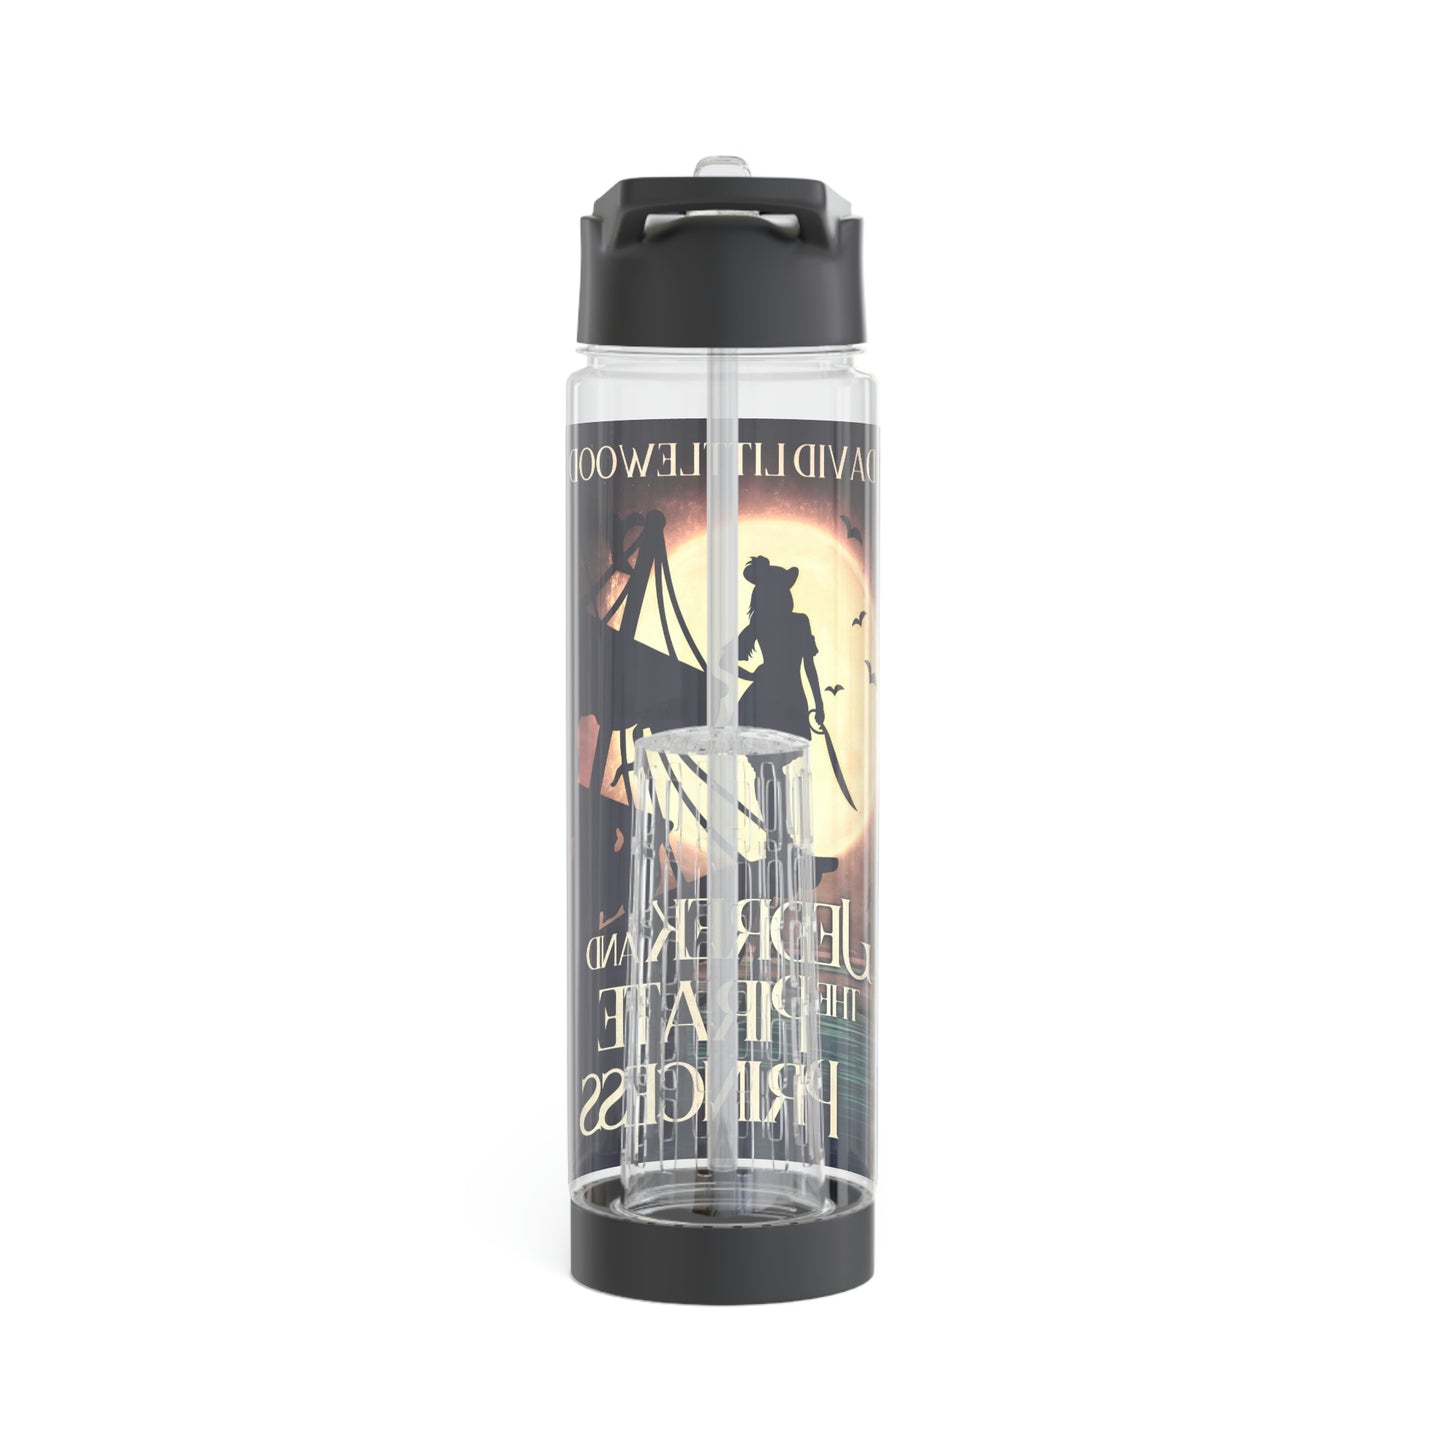 Jedrek And The Pirate Princess - Infuser Water Bottle